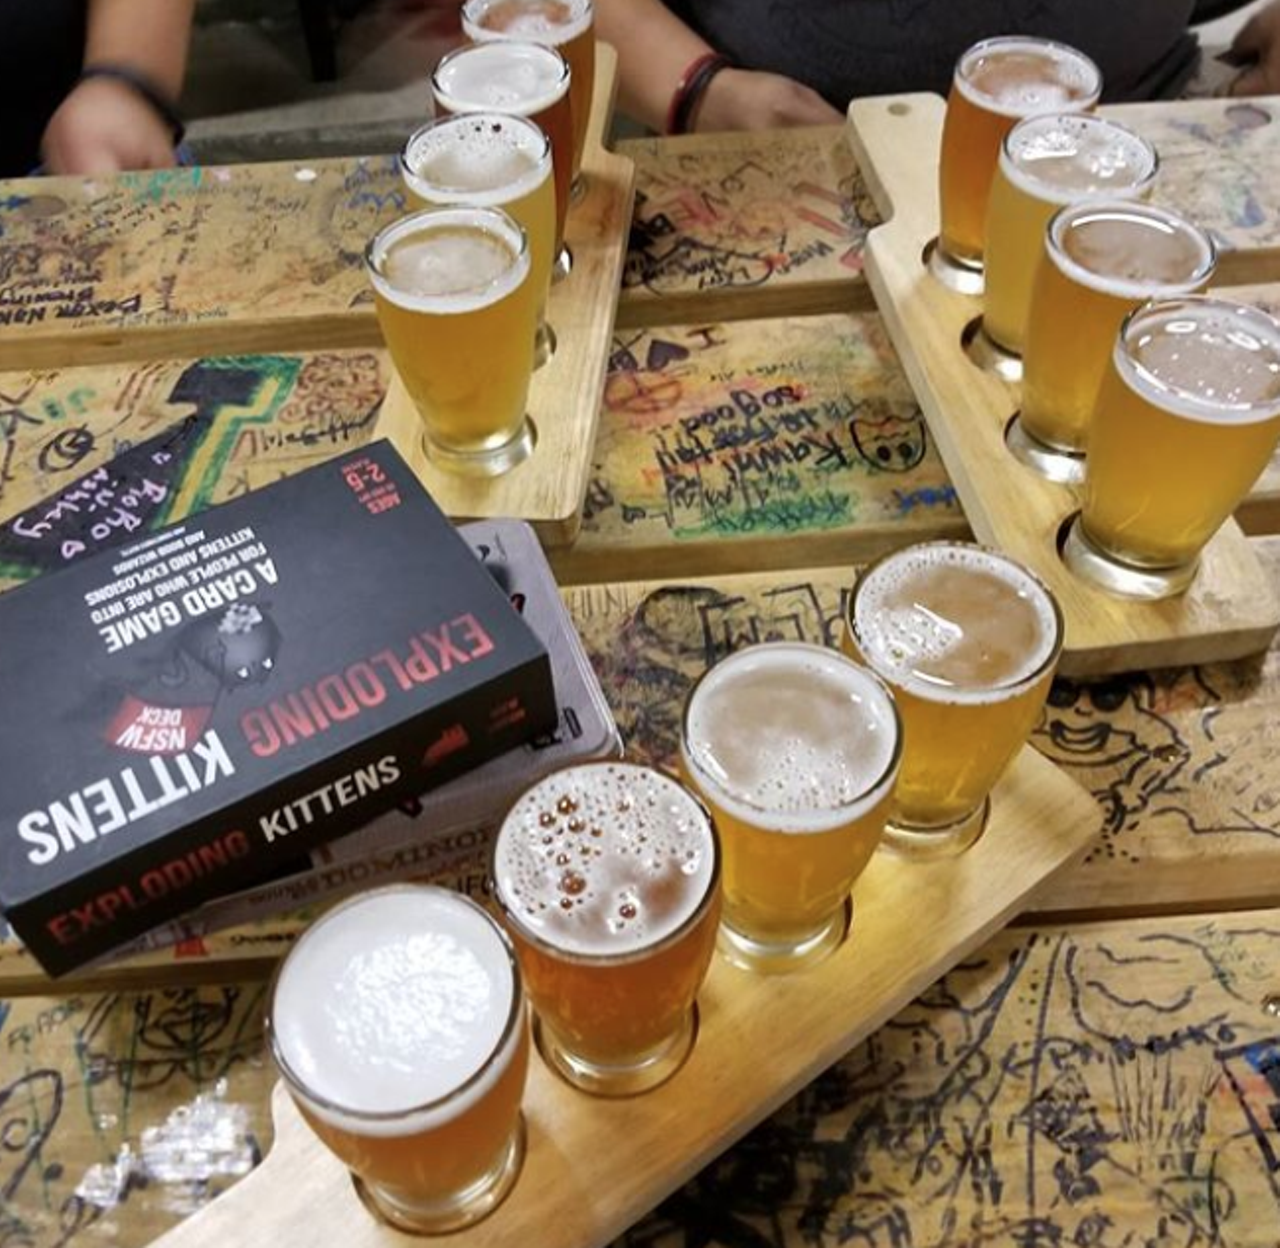 With its taproom and brewery off South Presa and original brewpub, Freetail is keeping most area beer drinkers happy. Try the Bexarliner series or their side project Ghost Pixel.
Photo via Instagram / lauri_lar